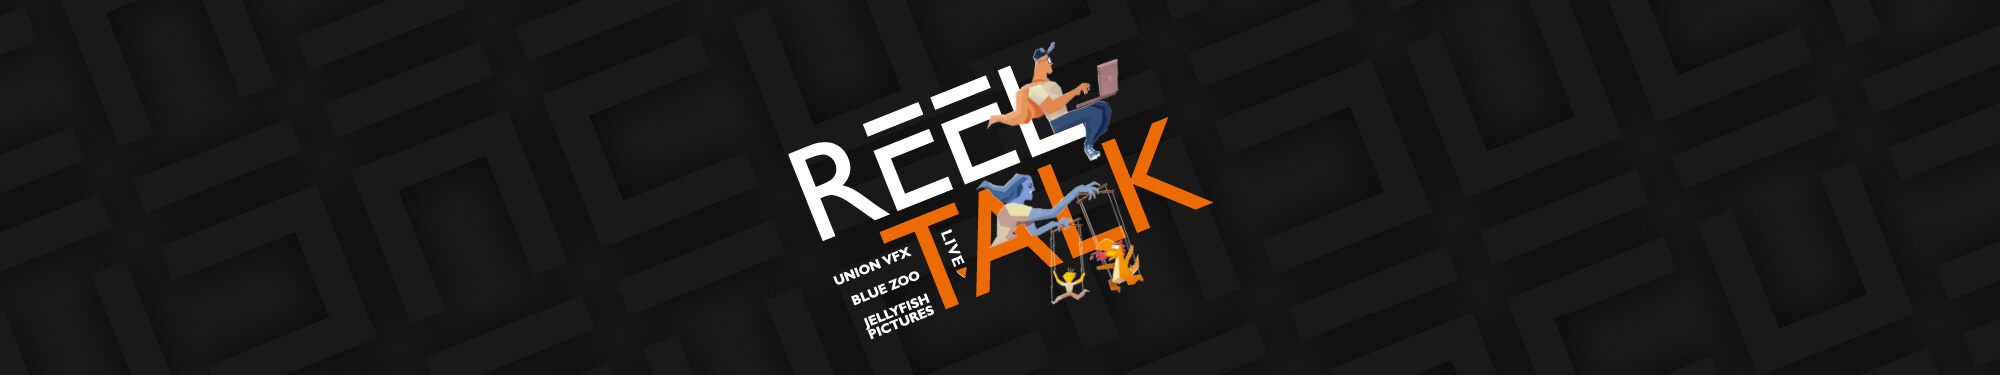 Reel Talk Live graphic with Union VFX, Blue Zoo and Jellyfish Pictures